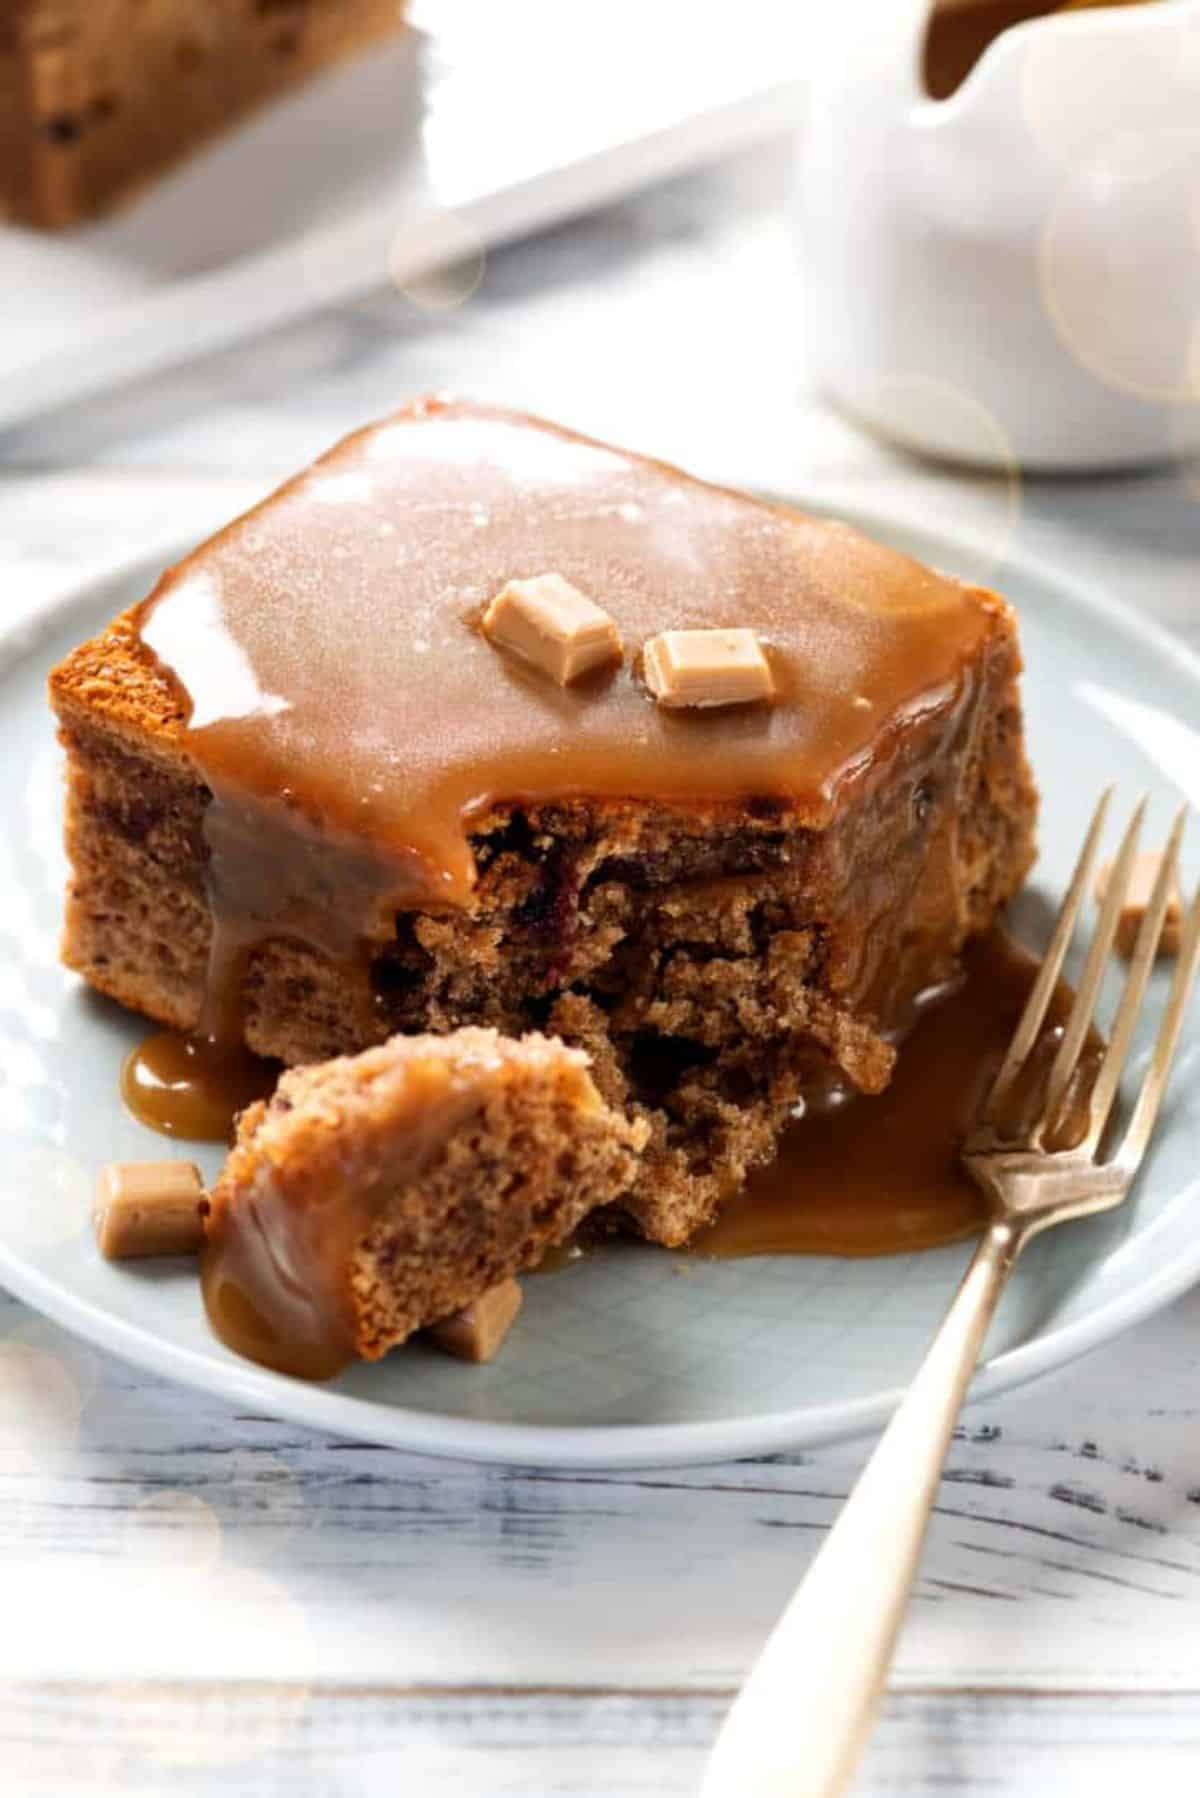 Mouth-watering sticky toffee pudding on a plate with a fork.